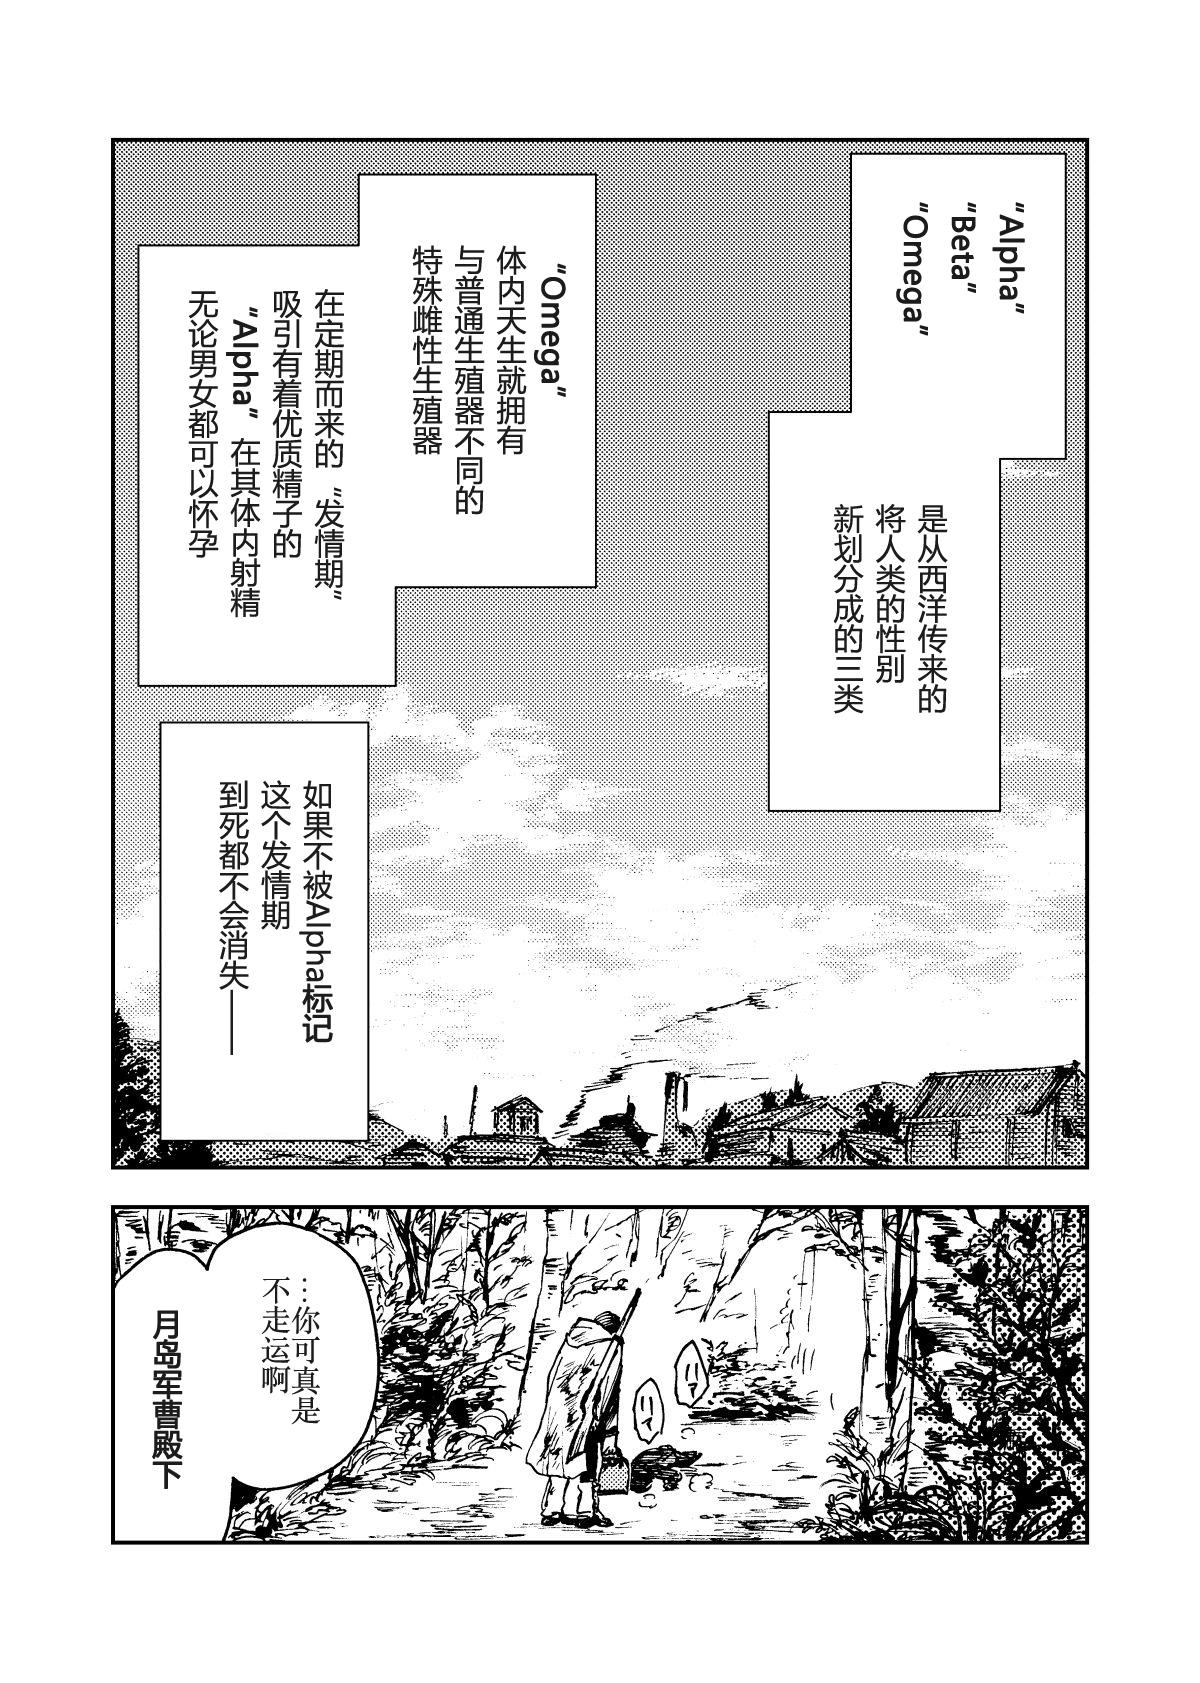 Foreplay （自汉化）啸猫弄月（Chinese） - Golden kamuy Short - Page 2